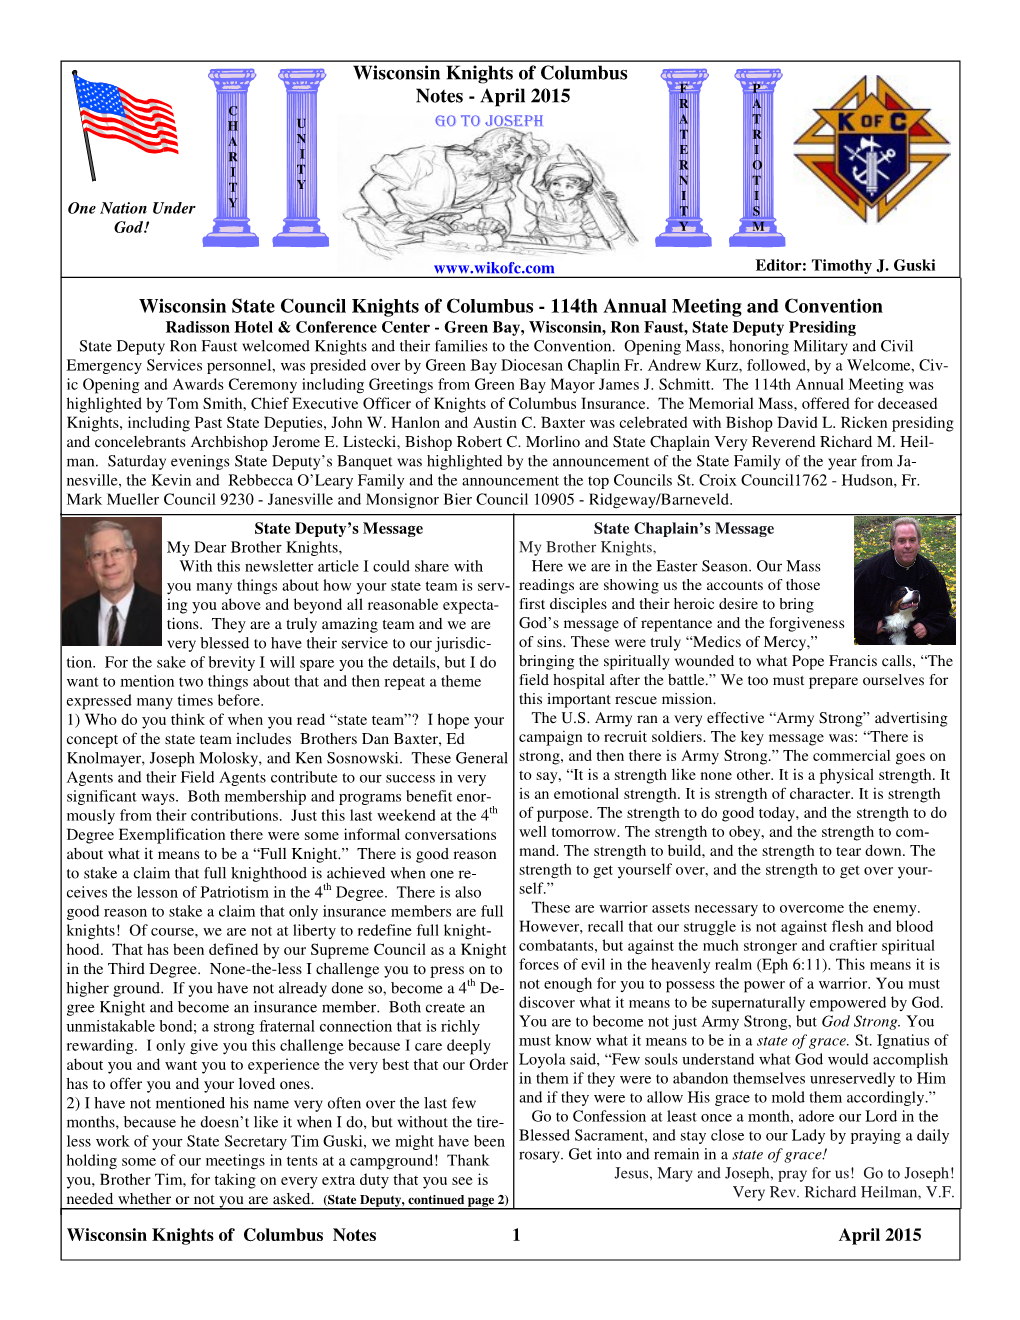 Wisconsin Knights of Columbus Notes 1 April 2015